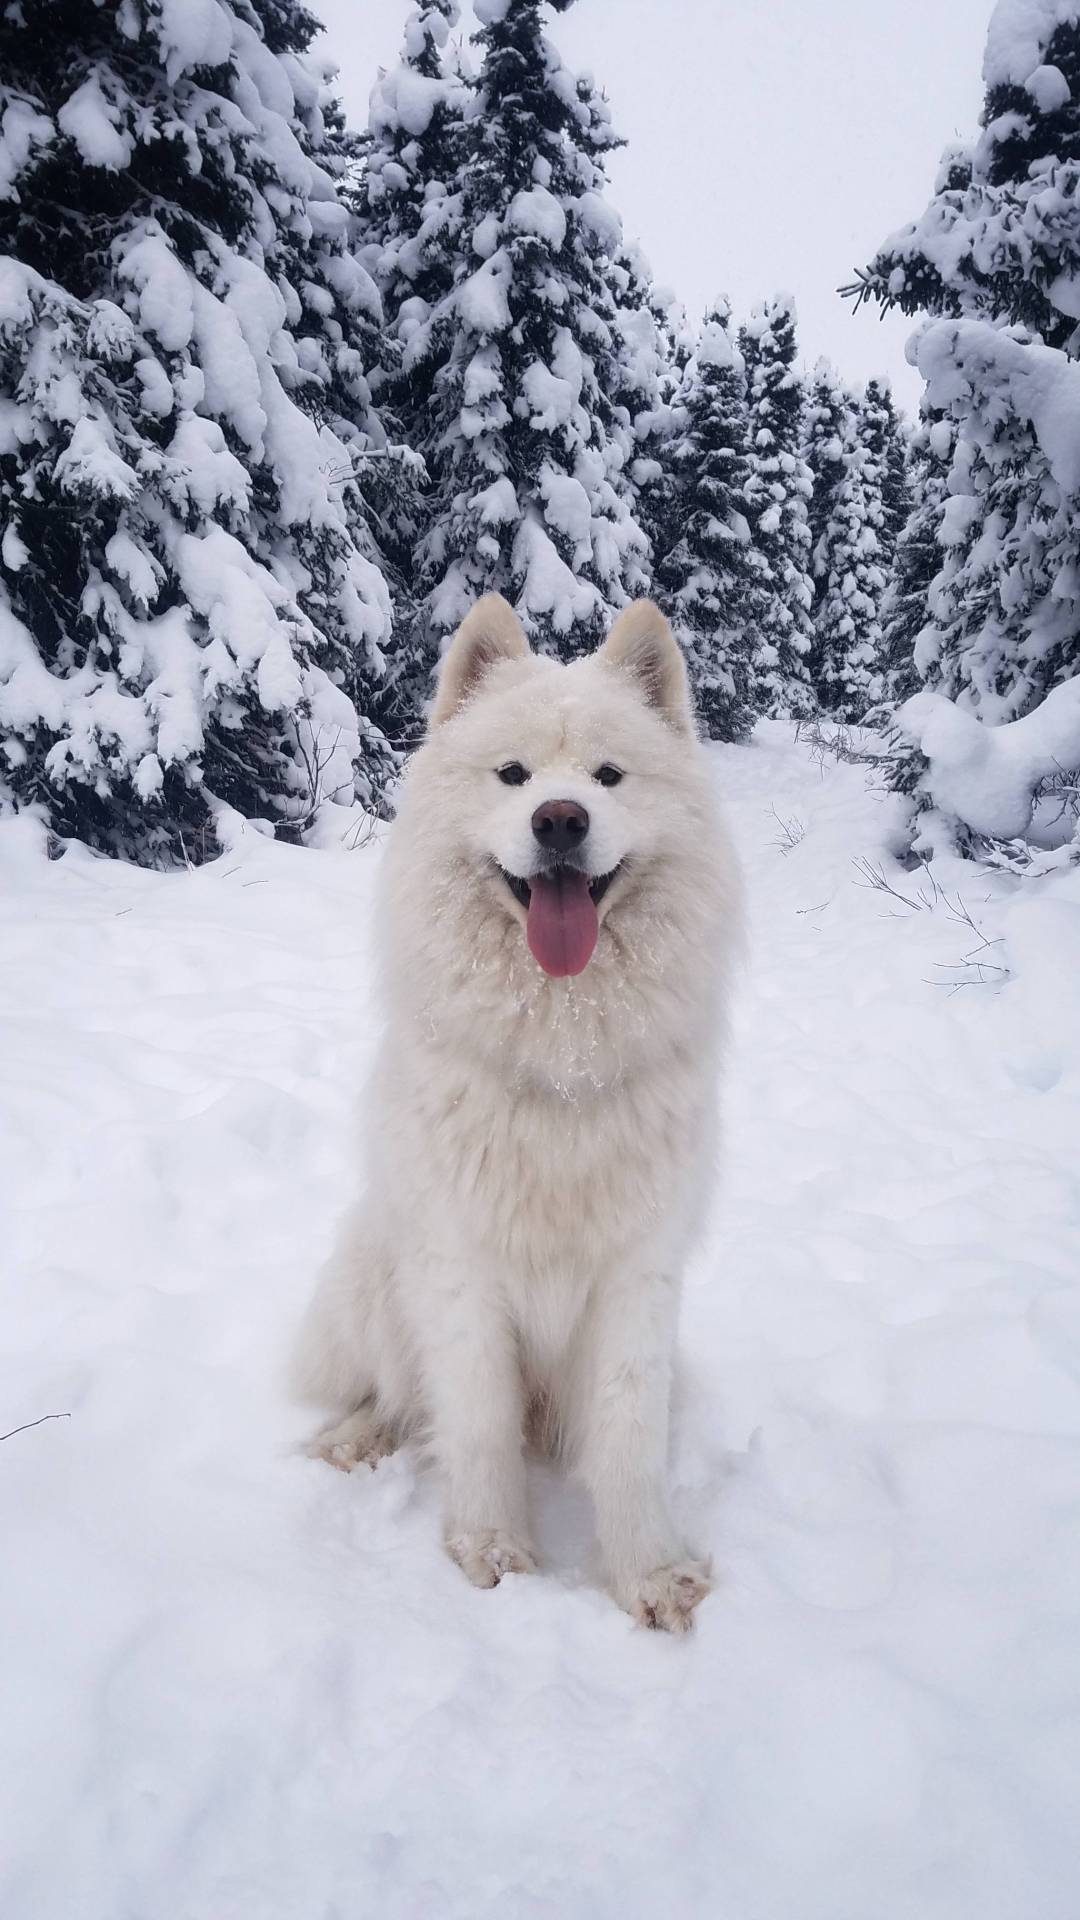 Every year I fall victim to SAD (Seasonal Affective Disorder). This year I started taking my neighbors dog for walks, and his joy for life has kept me positive through the long winter.
Source: http://bit.ly/2SoXuDn